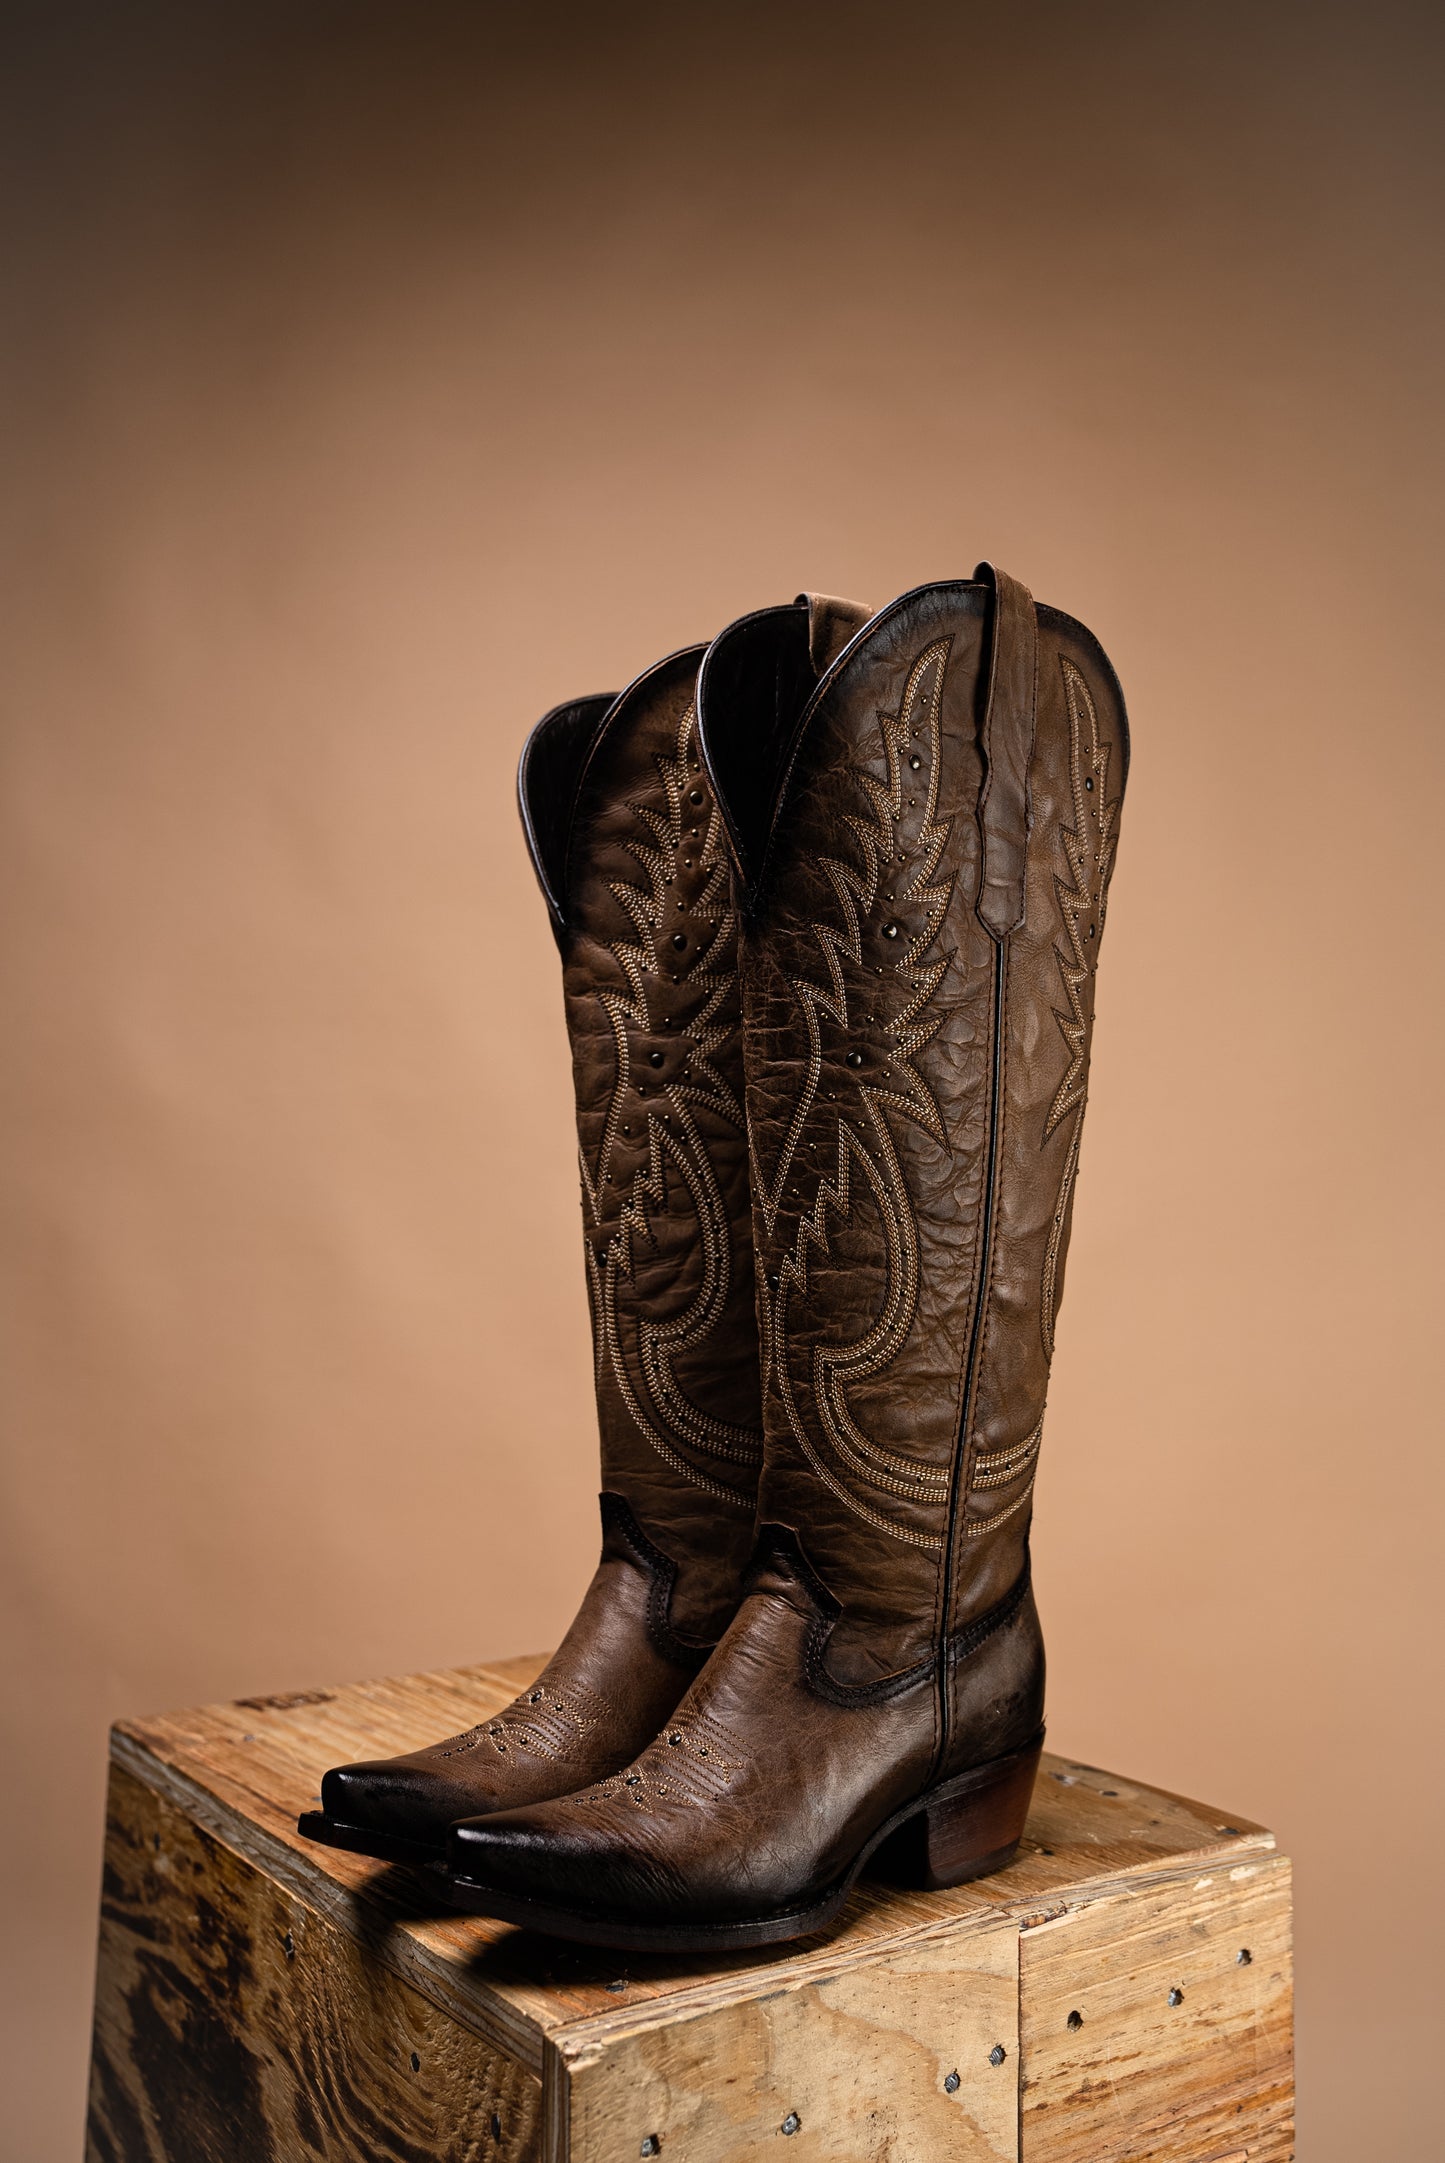 The Kayla Cedro Camel C/Estoperol Tall Wide Calf Friendly Cowgirl Boot